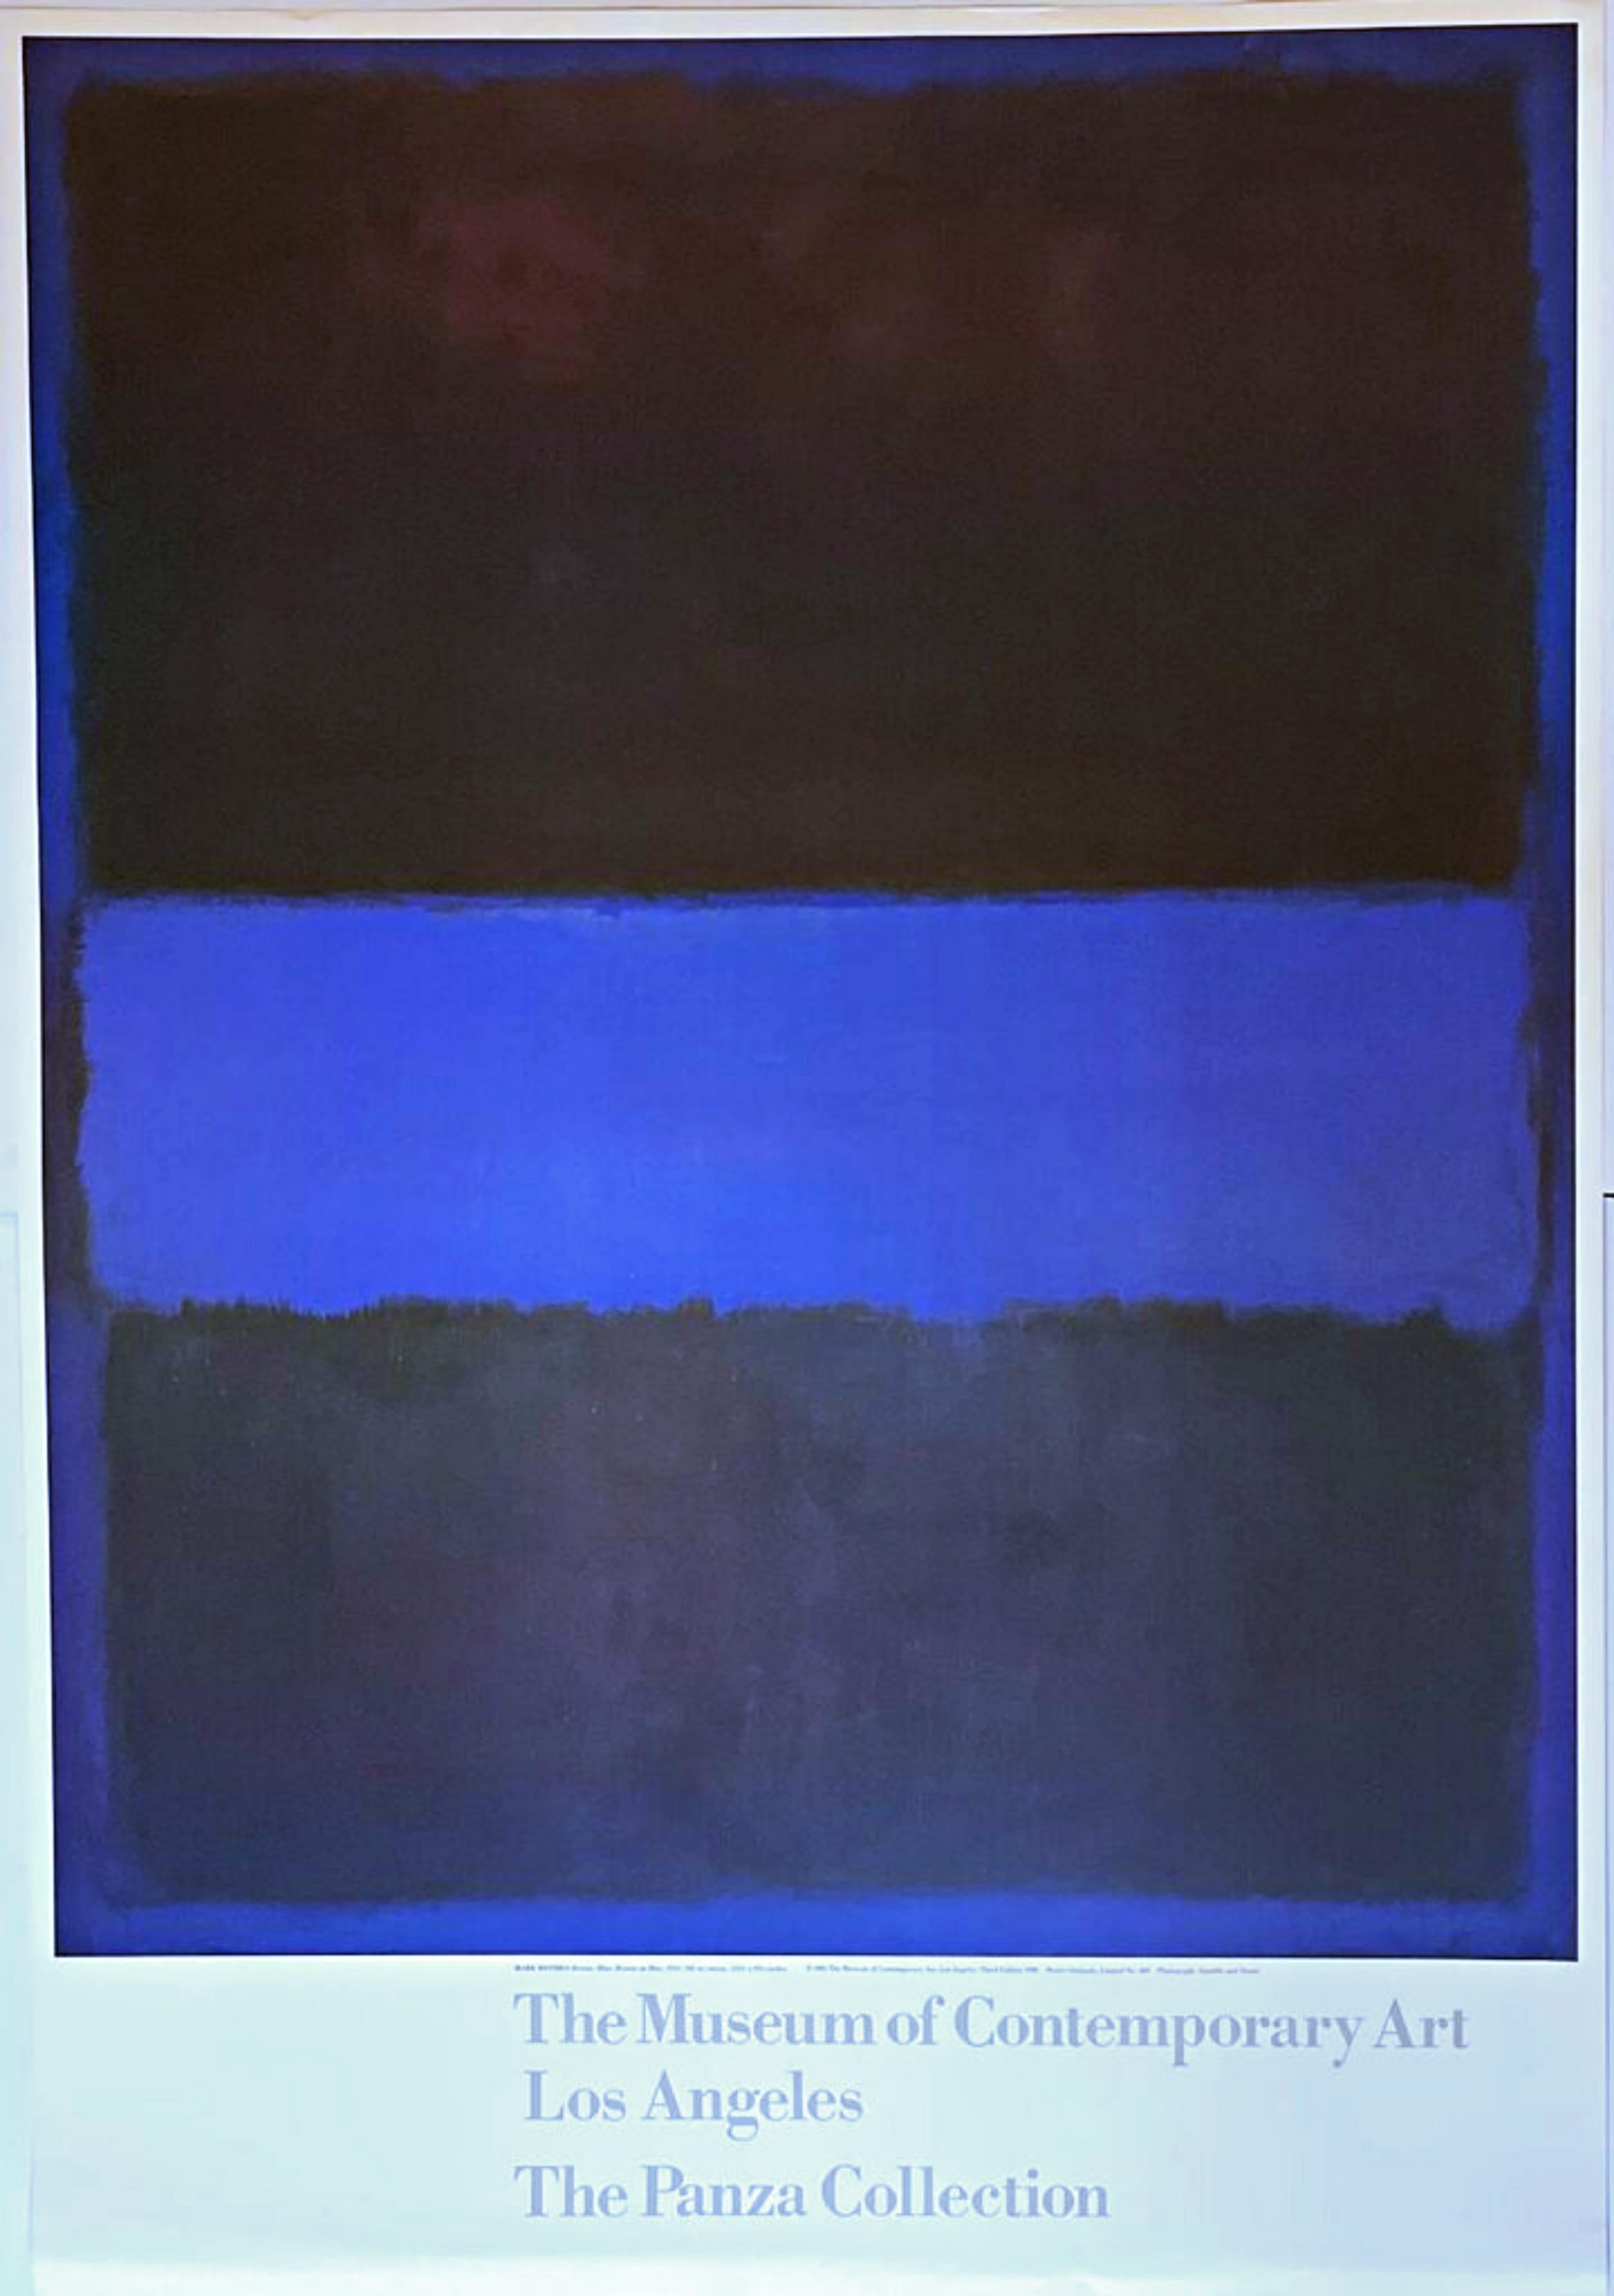 Abstract Print Mark Rothko - Affiche de la collection Panza, Museum of Contemporary Art Los Angeles, édition limitée